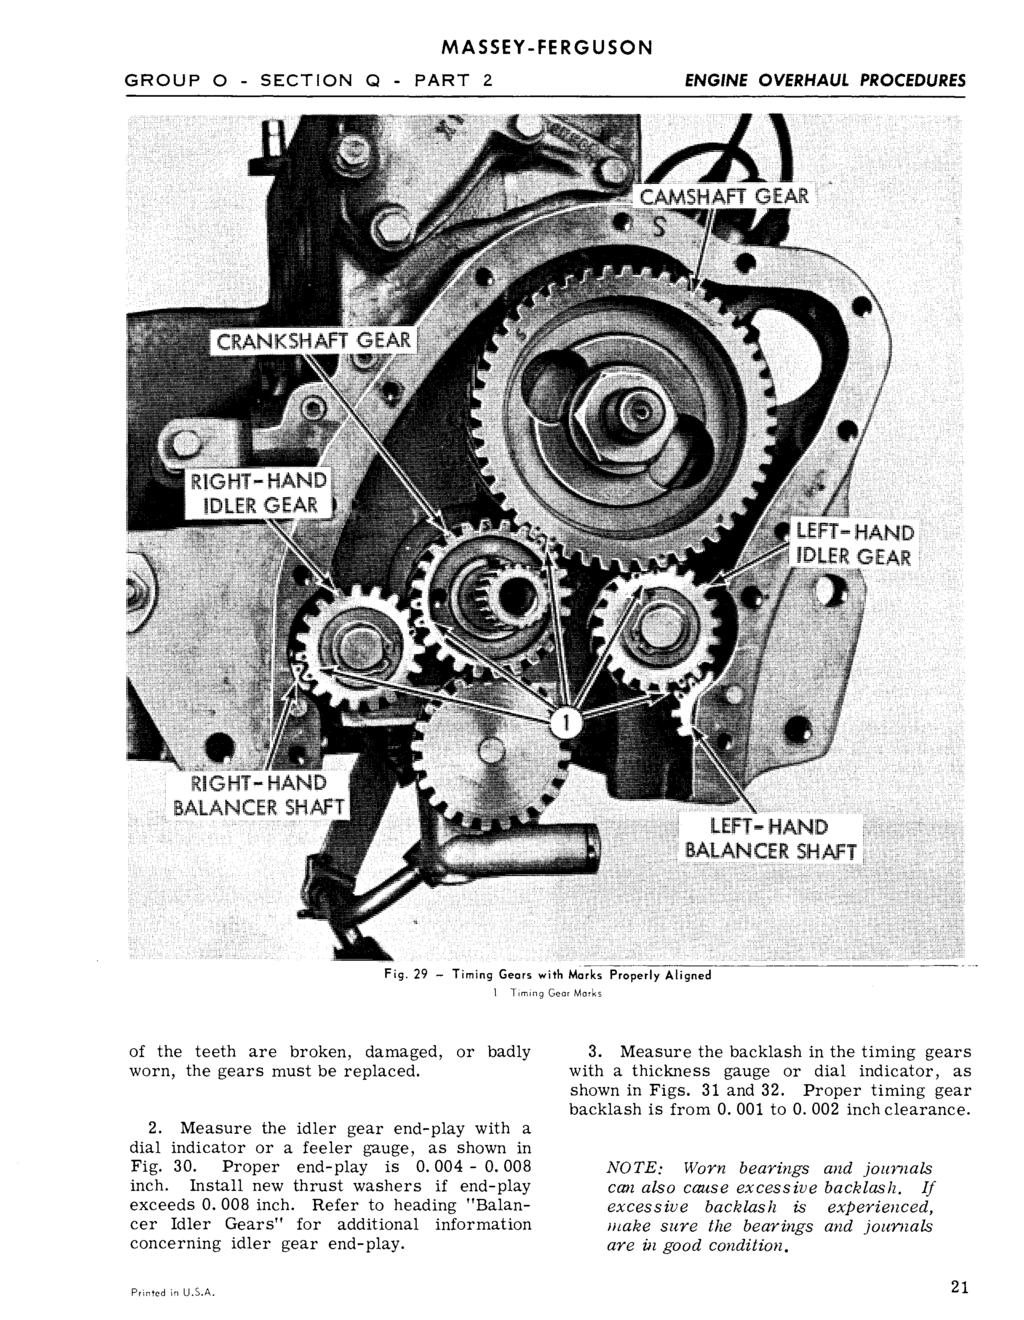 MASSEY-FERGUSON GROUP 0 - SECTION Q - PART 2 ENGINE OVERHAUL PROCEDURES 1 Timing Gear Marks of the teeth are broken, damaged, or badly worn, the gears must be replaced. 2. Measure the idler gear end-play with a dial indicator or a feeler gauge, as shown in Fig.